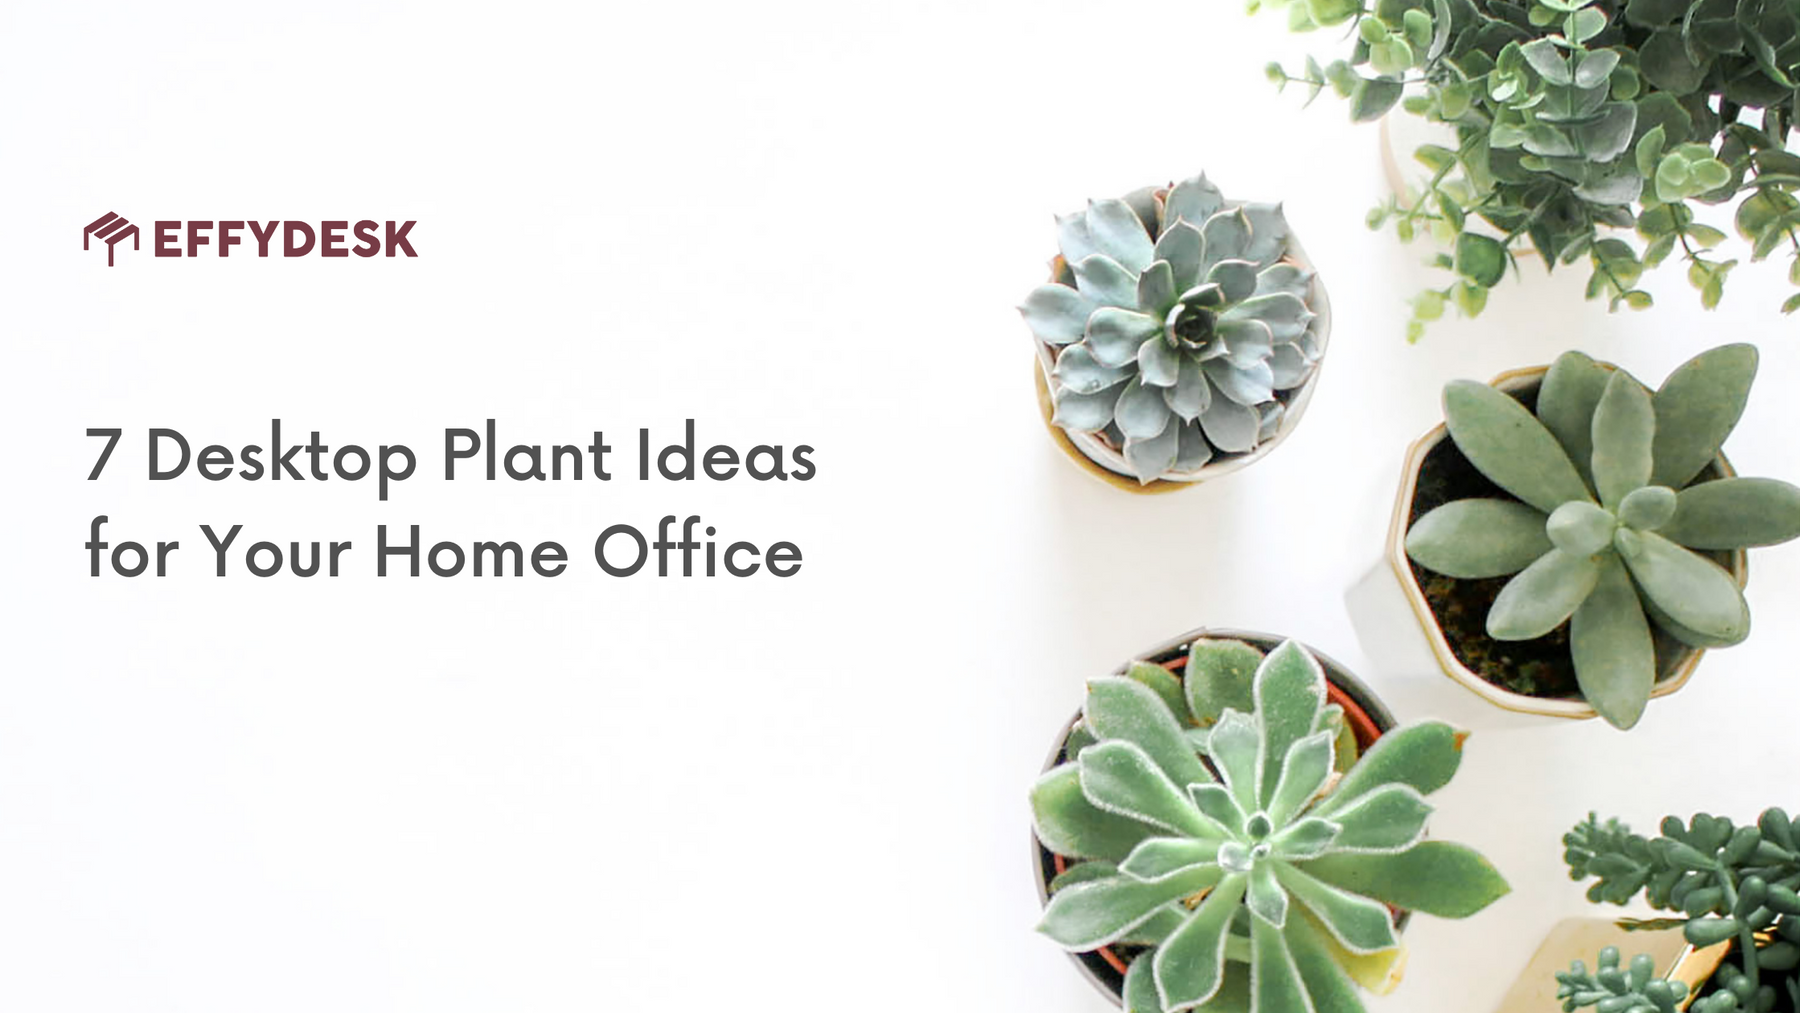 some desktop plants ideas that you can put apply for your Home Office